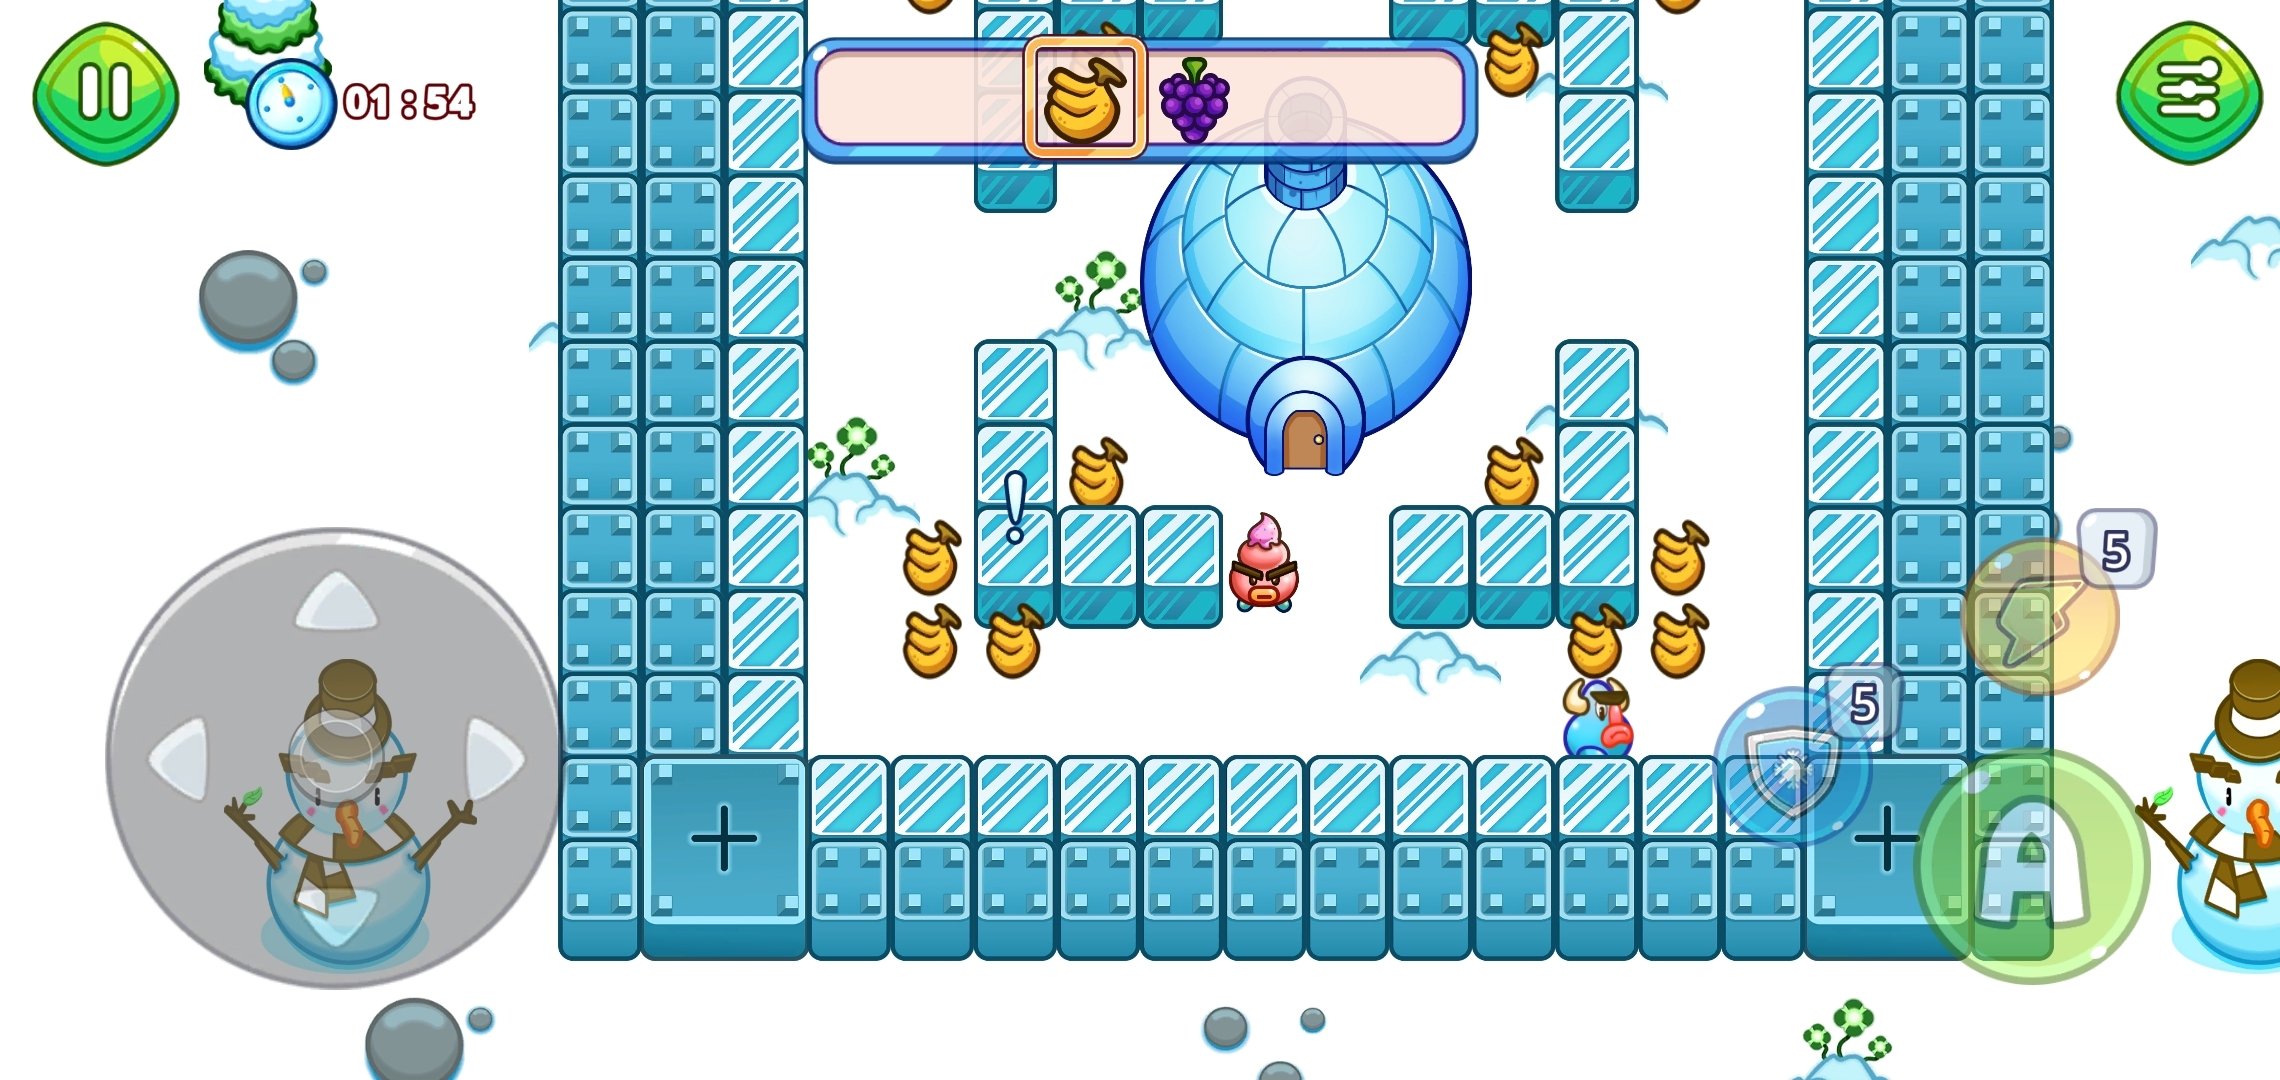 About: Bad Ice Cream Deluxe: Fruit Attack (Google Play version)